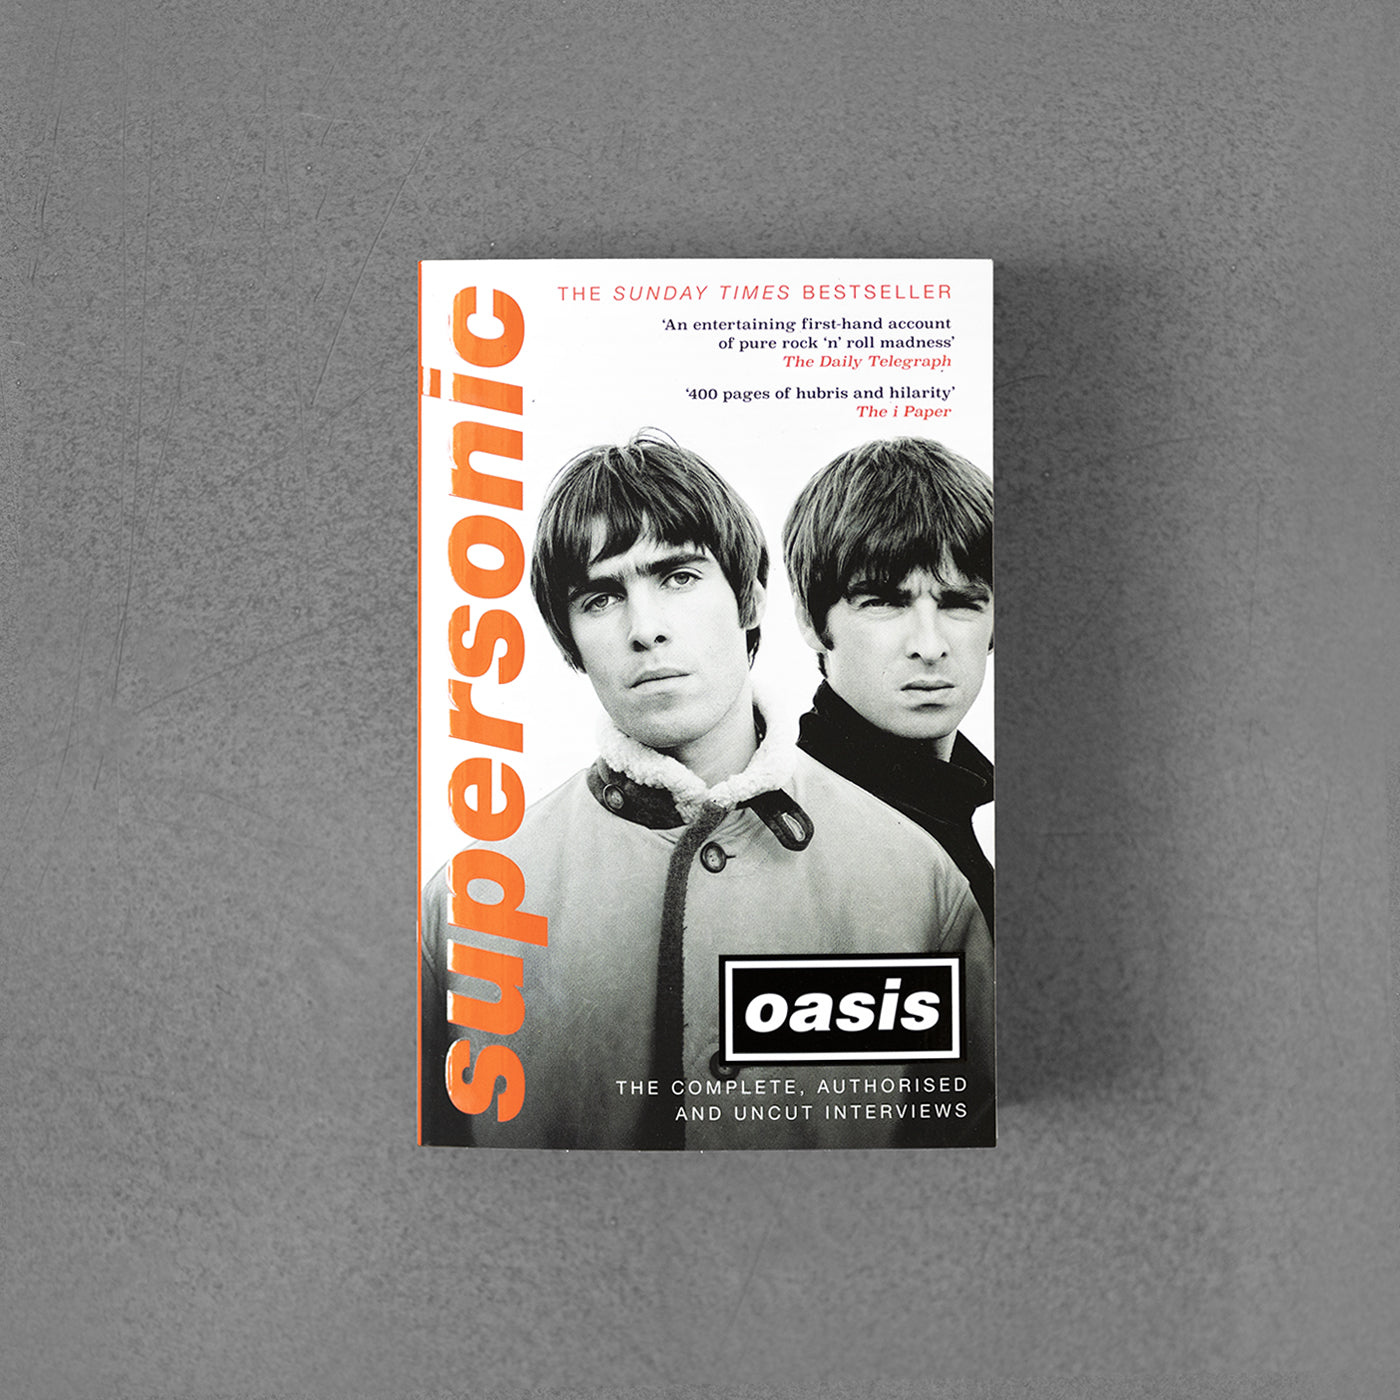 Supersonic: Oasis